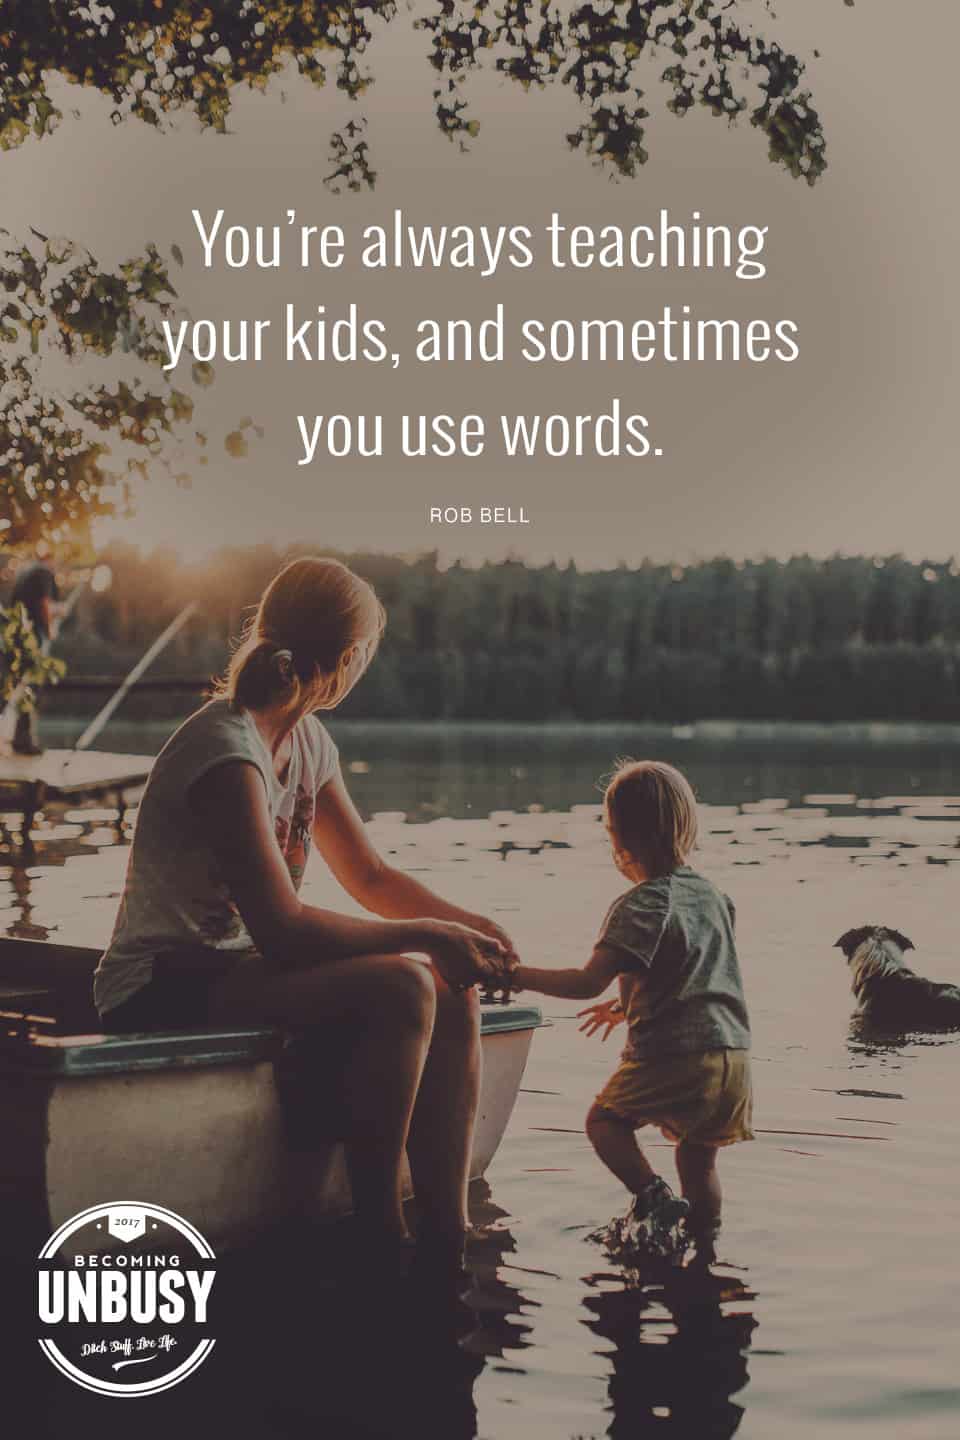 You're always teaching your kids, sometimes you use words. - Rob Bell #quote #parenting #BecomingUnbusy *love this video and site